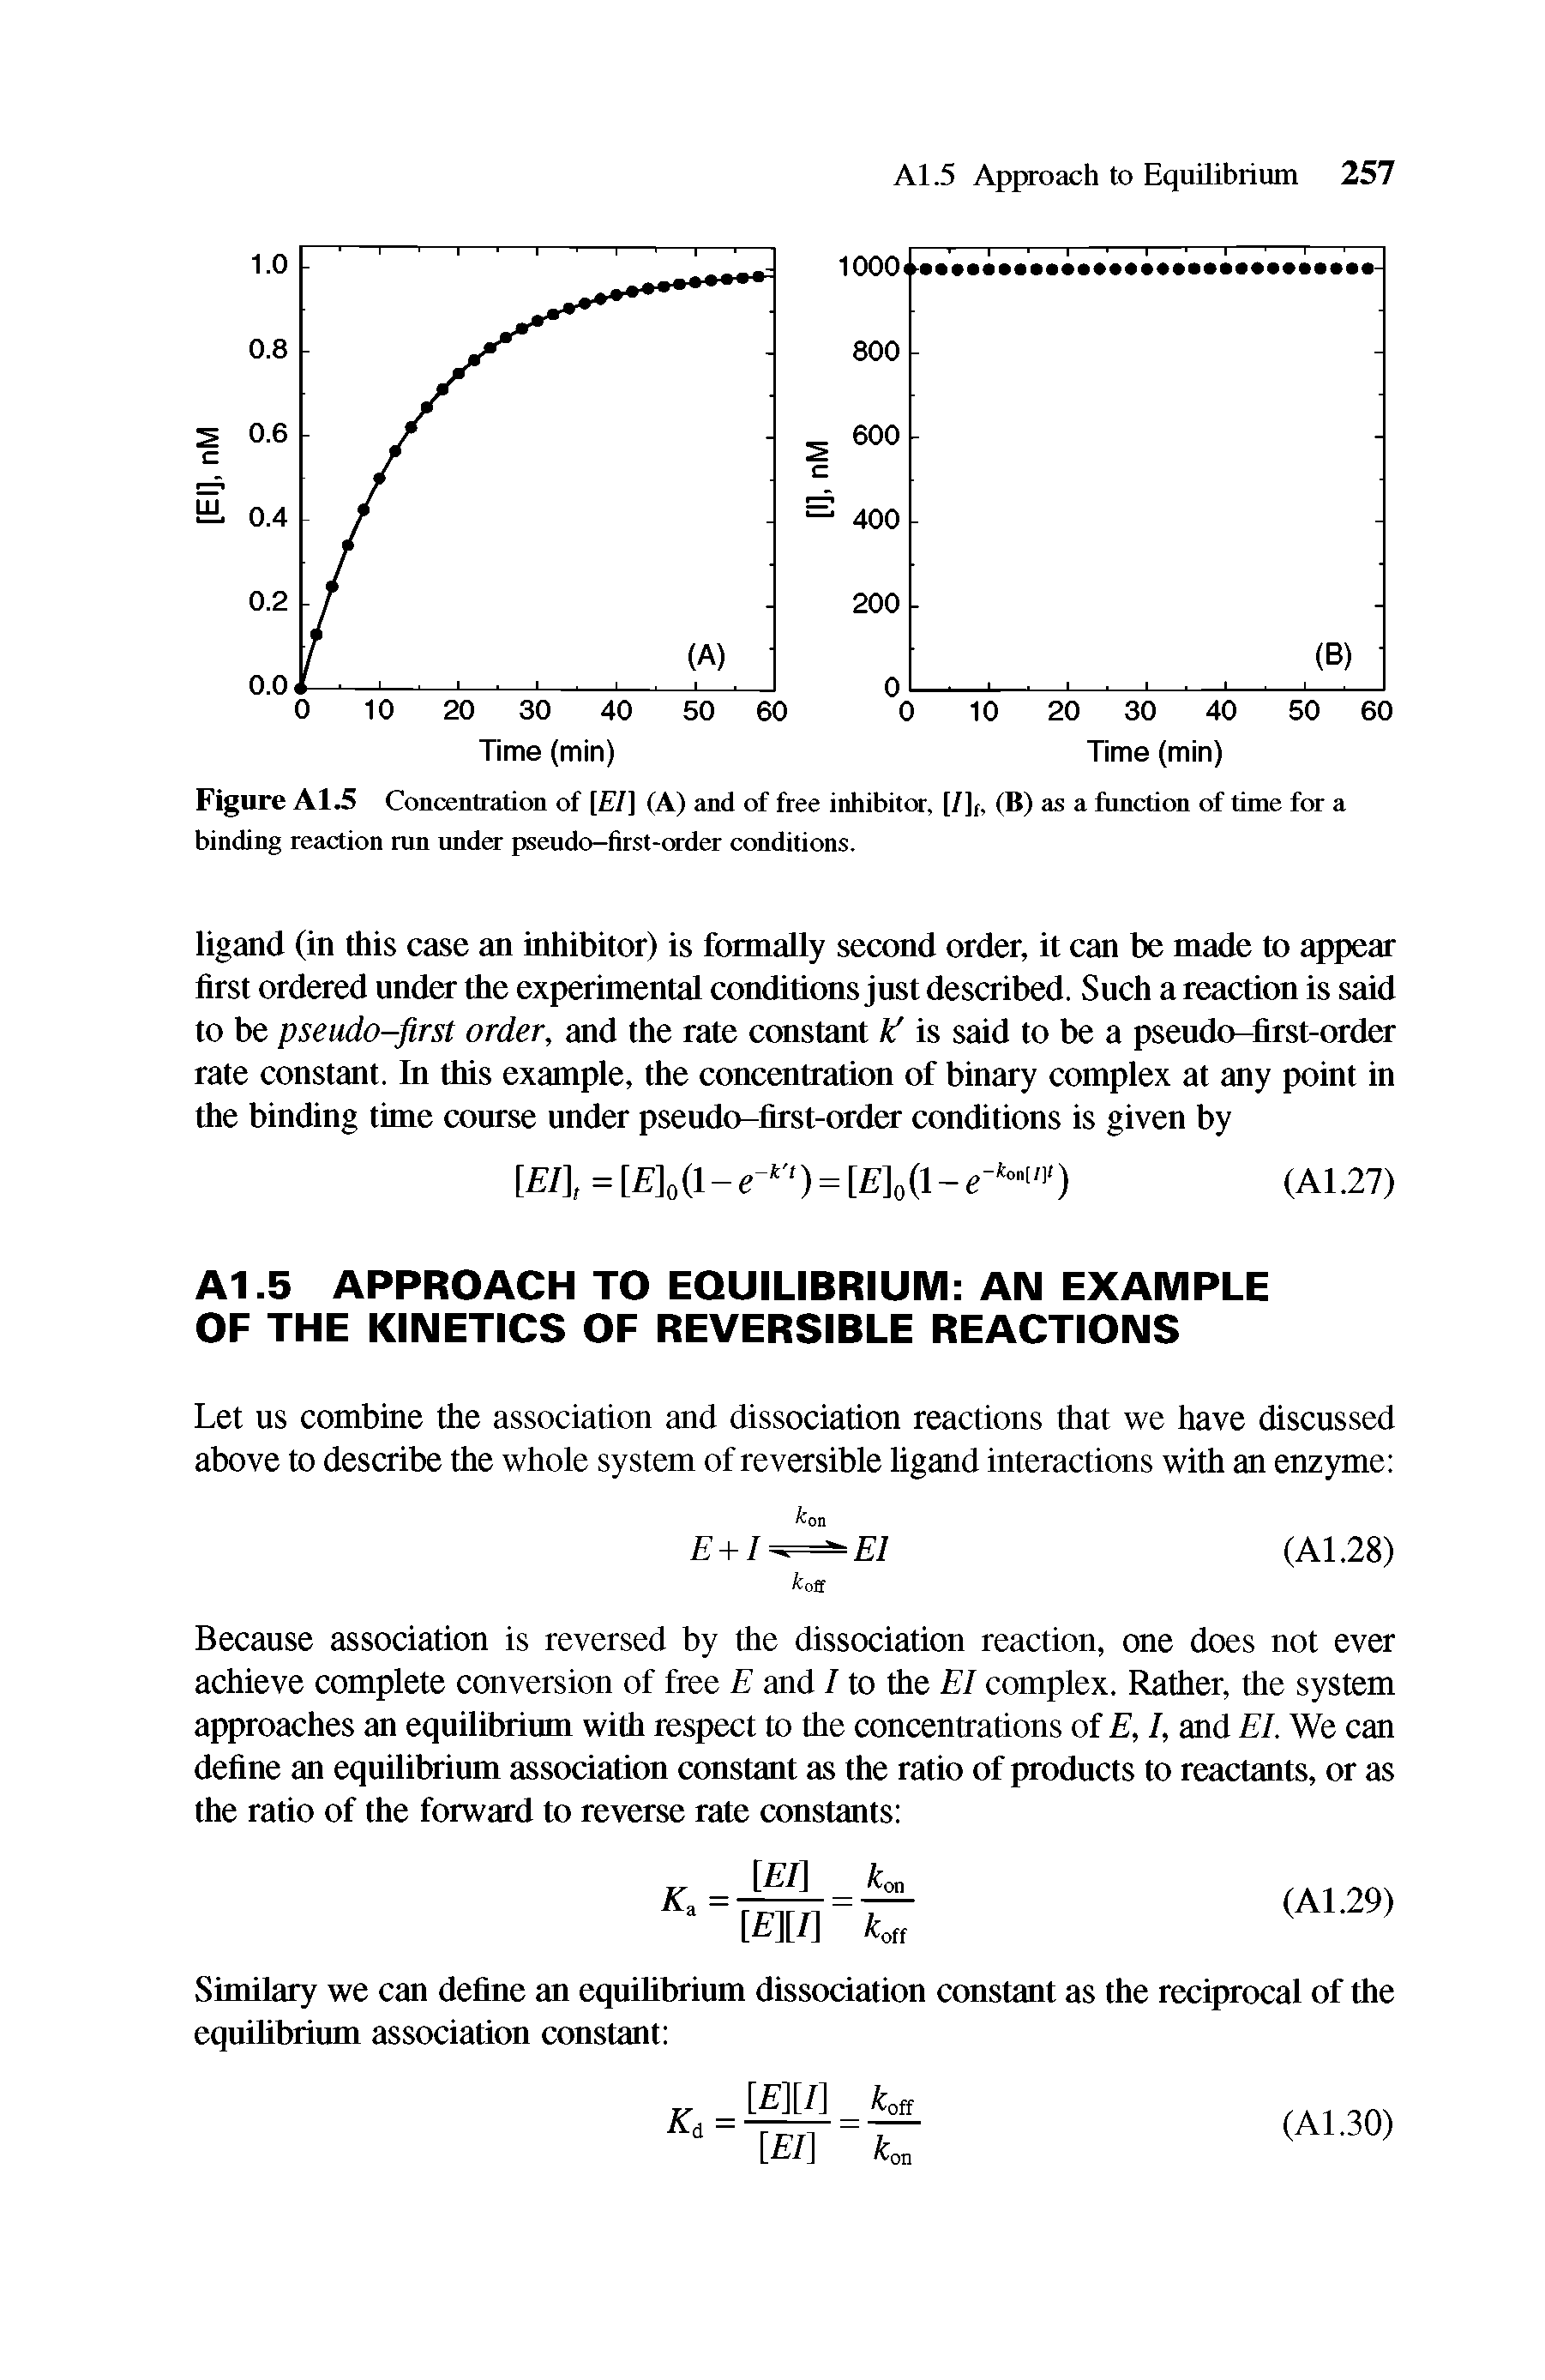 Figure A1.5 Concentration of [El] (A) and of free inhibitor, [/]f, (B) as a function of time for a binding reaction run under pseudo—first-order conditions.